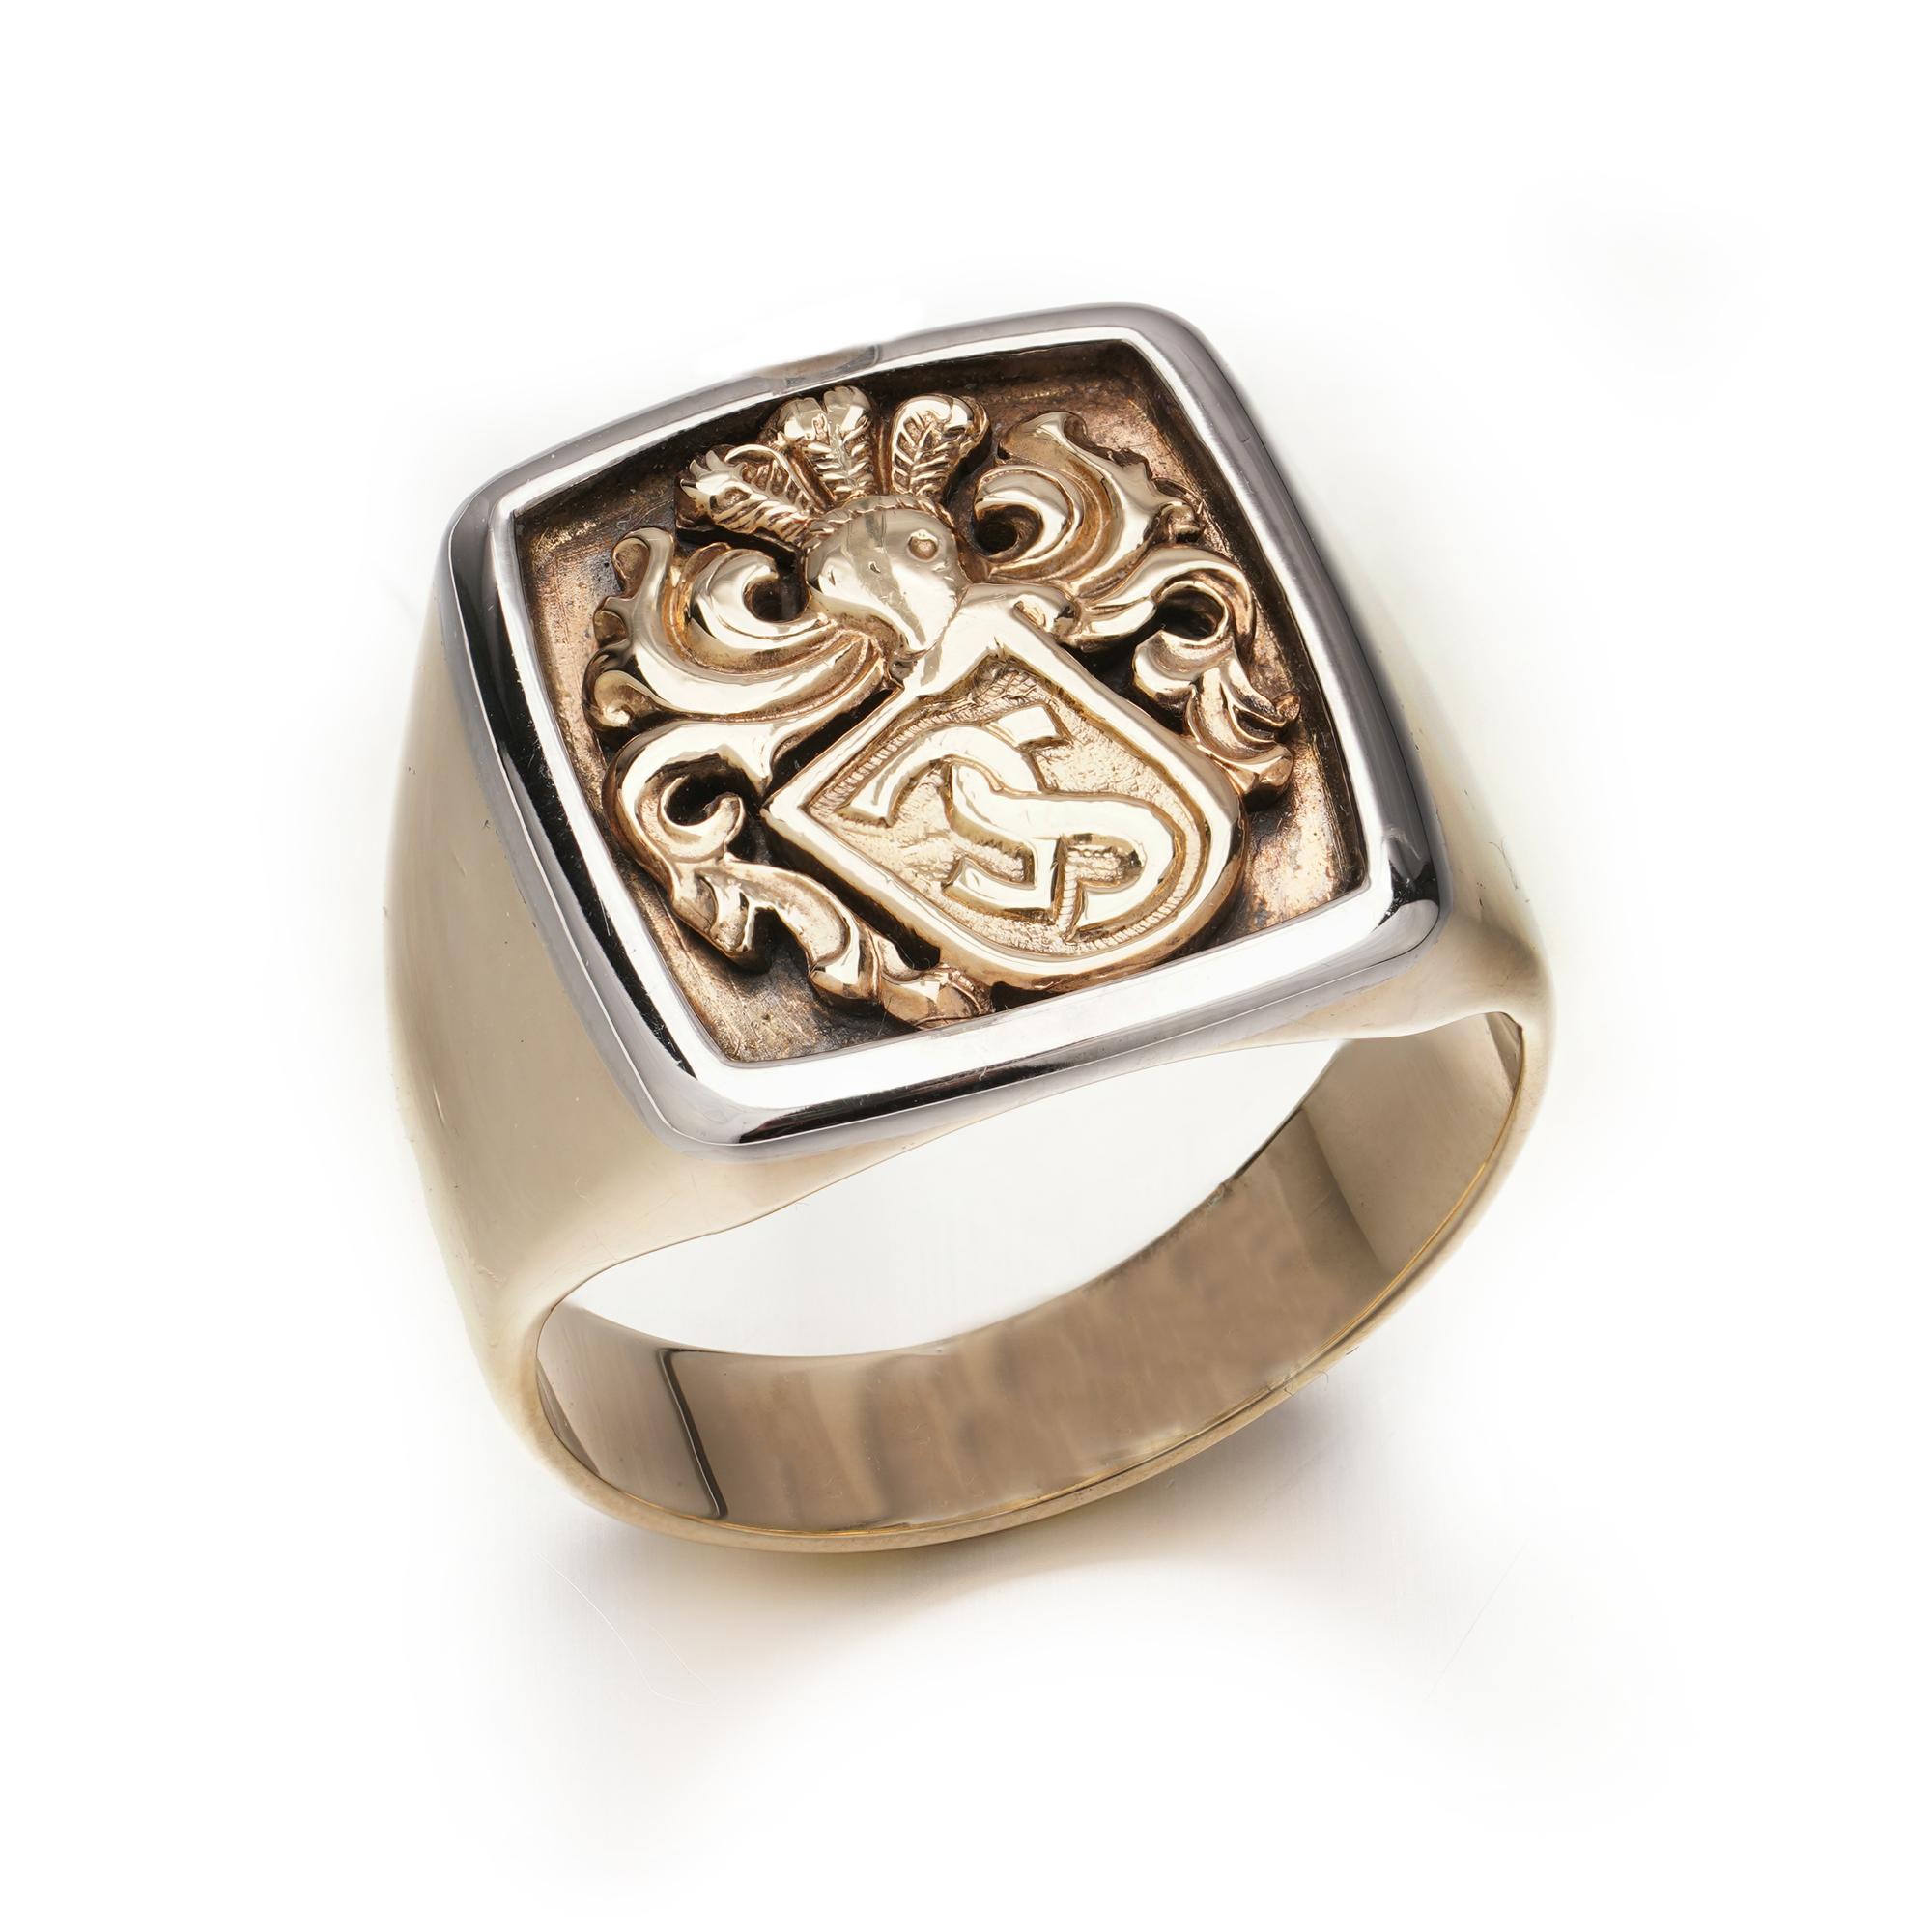 Vintage 9kt. yellow gold and white gold signet ring with coat of arms.
Made in Ca. 1990's
Marked: Gam
X - ray has been tested positive for 9kt. gold.

The dimensions -
Ring Size: Length x Width x depth: 2.7 x 2.9 x 1.9 cm
Finger Size (UK) = T (EU) =